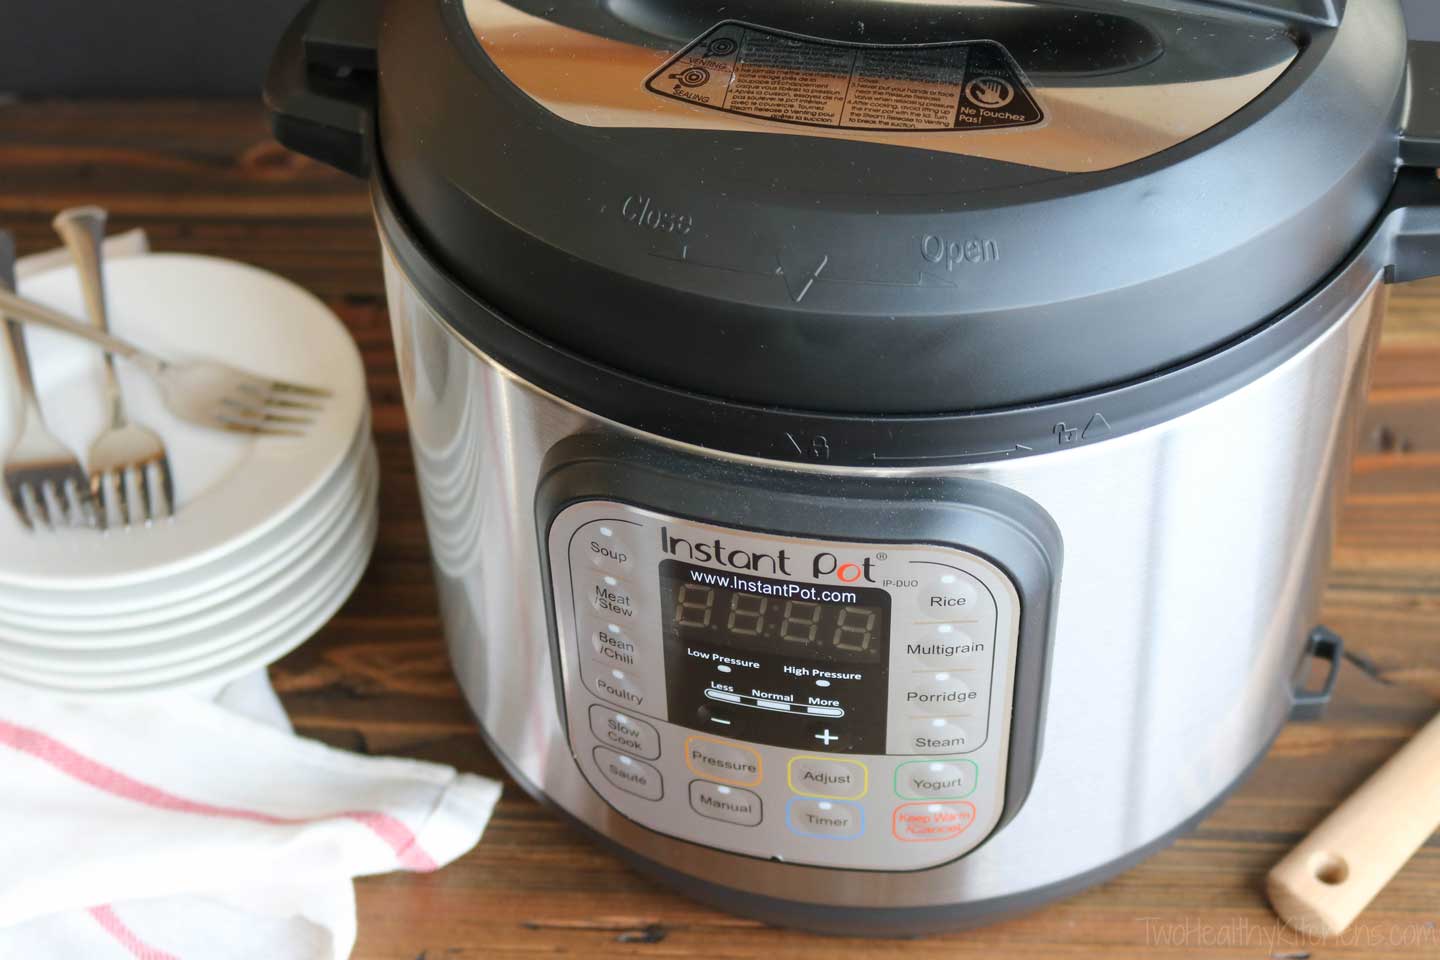 Instant Pot multi-function electric pressure cooker displayed with plates, forks and dish towel